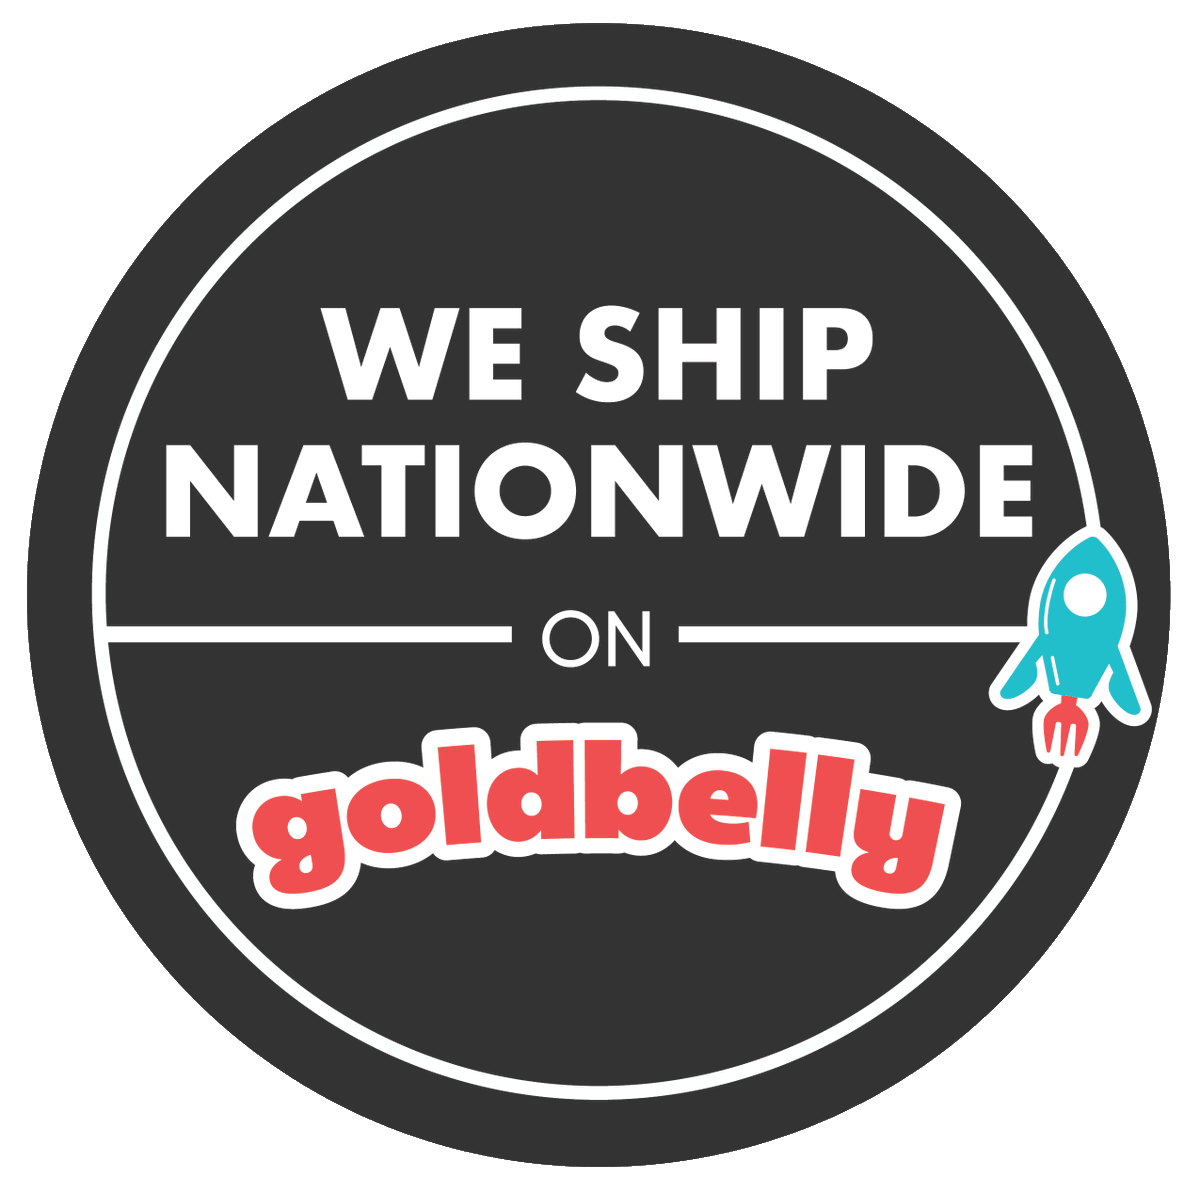 If you can't come to us, we can come to you! 🛫🚚#yaasss

➡️goldbelly.com/pappys-smokeho…

#mondaymotivation #orderonline #homedelivery #nationwideshipping #goldbelly #pappyssmokehouse #stlouis #stl #stleats #eatstl #eatlocal #stlfoodie #foodie #food #bbq #bbqfoodie #bbqlover